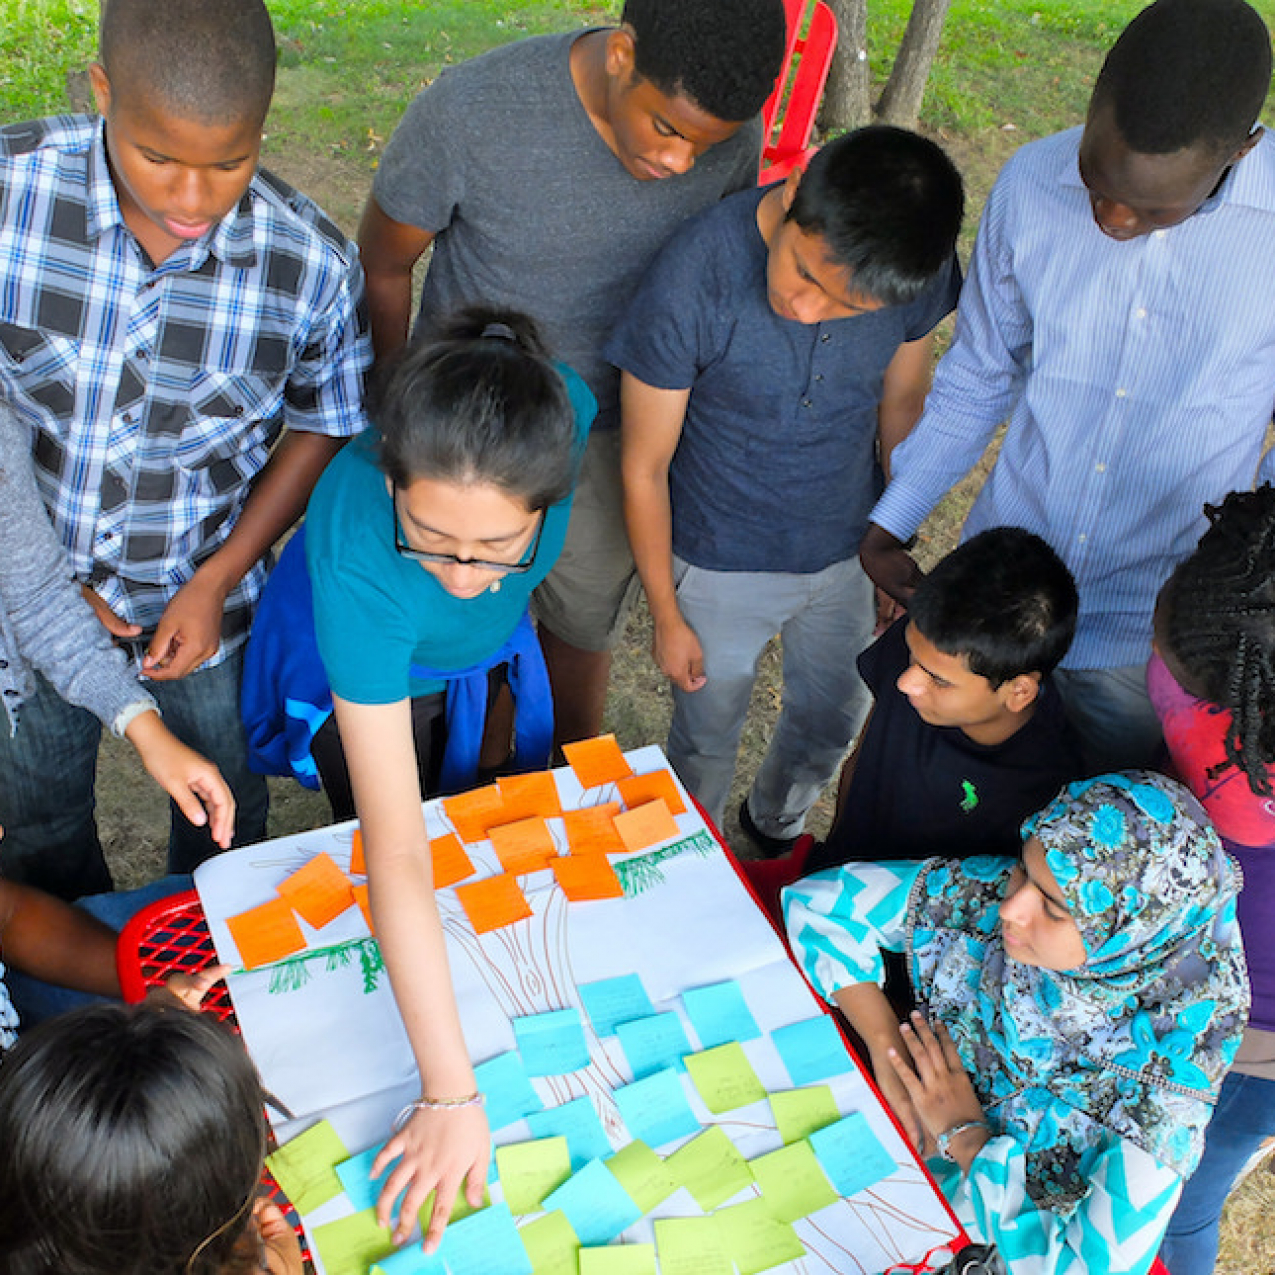 An overhead photo of students gathered around a poster with sticky notes of action items (not readable).